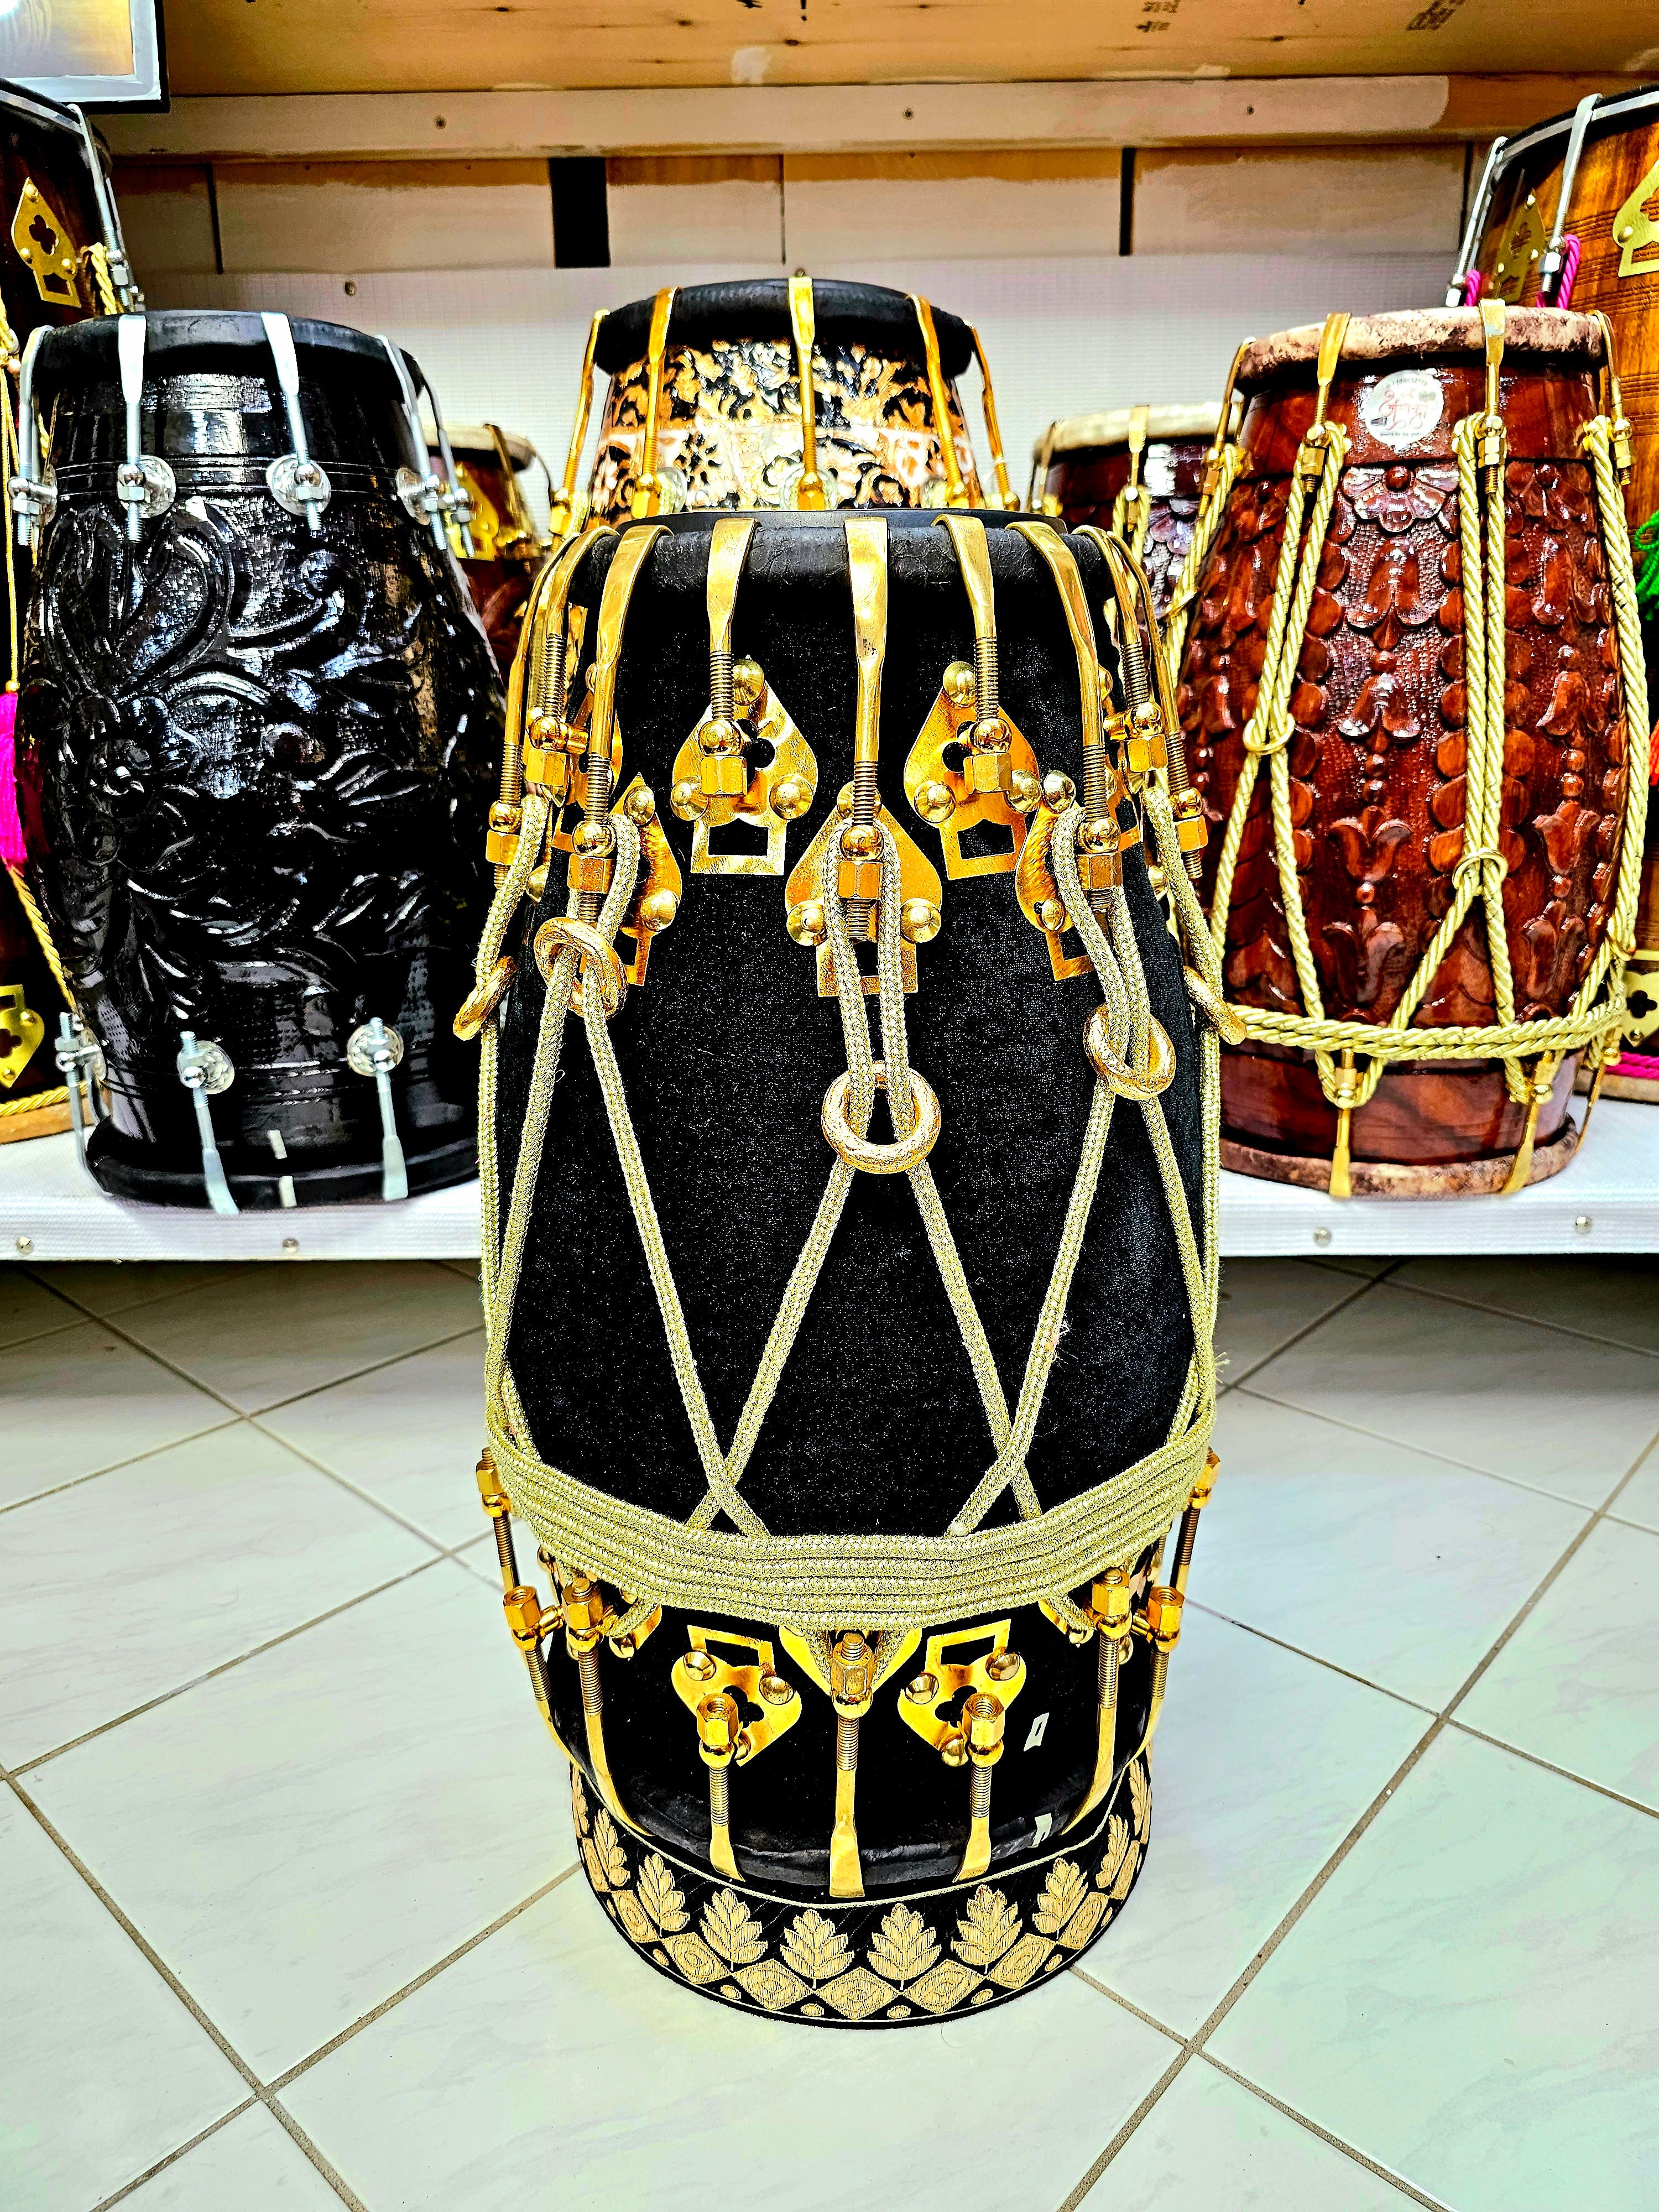 Velvet Elegance: Exotic Black Dholak with 36 Golden  Pure Brass Bolts and Black Pudis